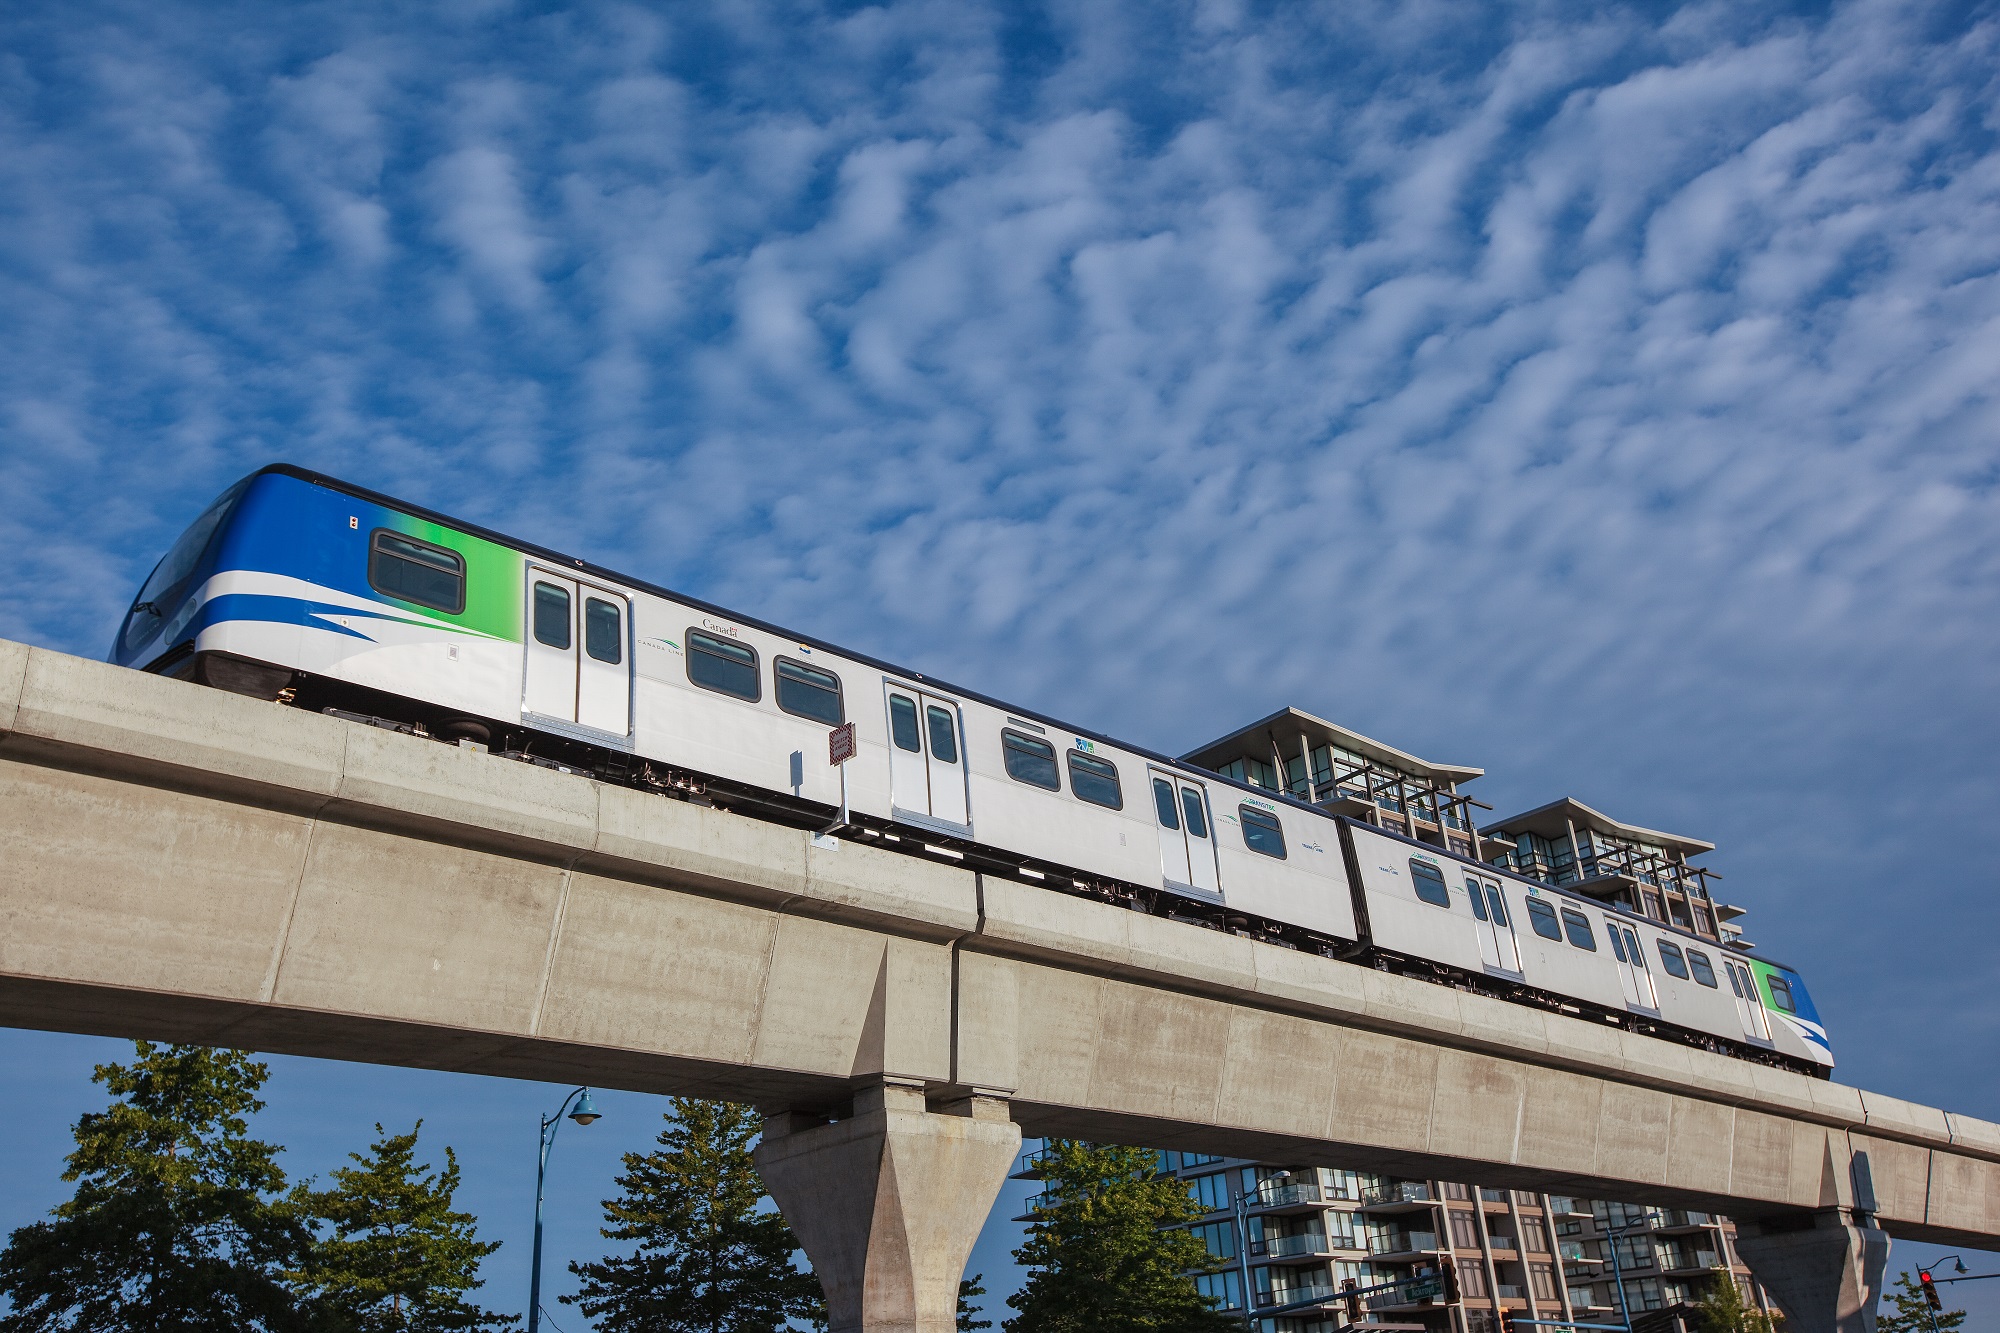 Photo of the Canada Line